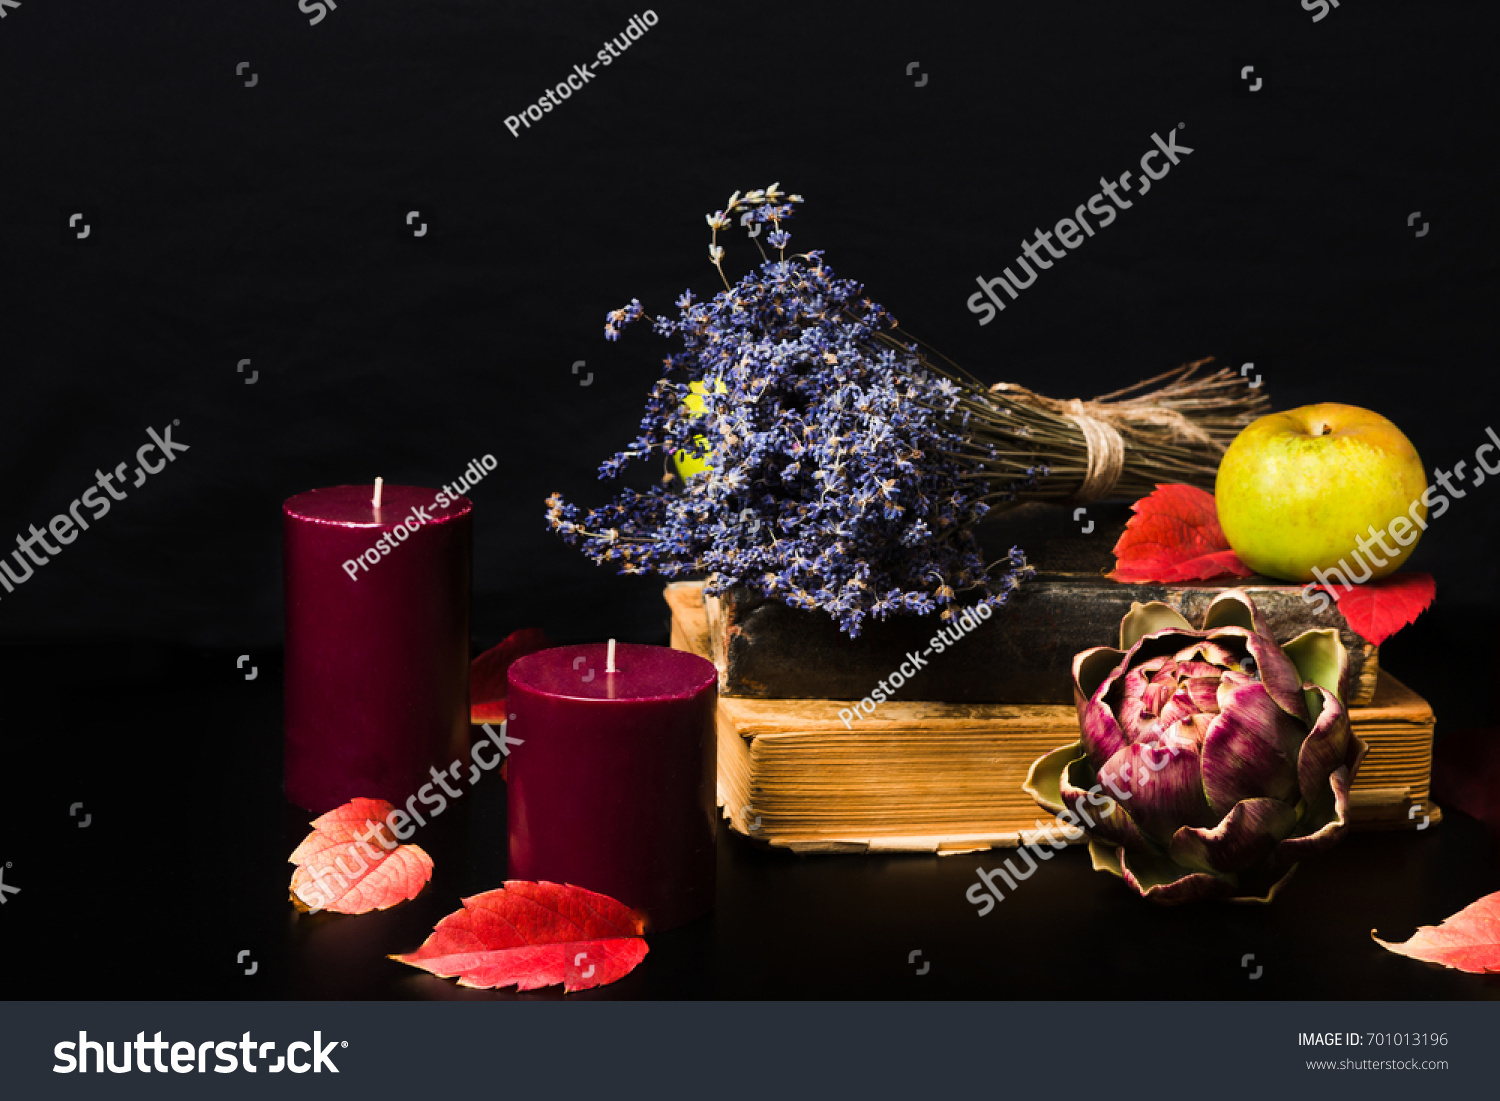 Warm fall composition on black background. Old books, candles, green apples, dry lavender, artishok and red autumn leaves making cozy romantic atmosphere. Copy space #701013196